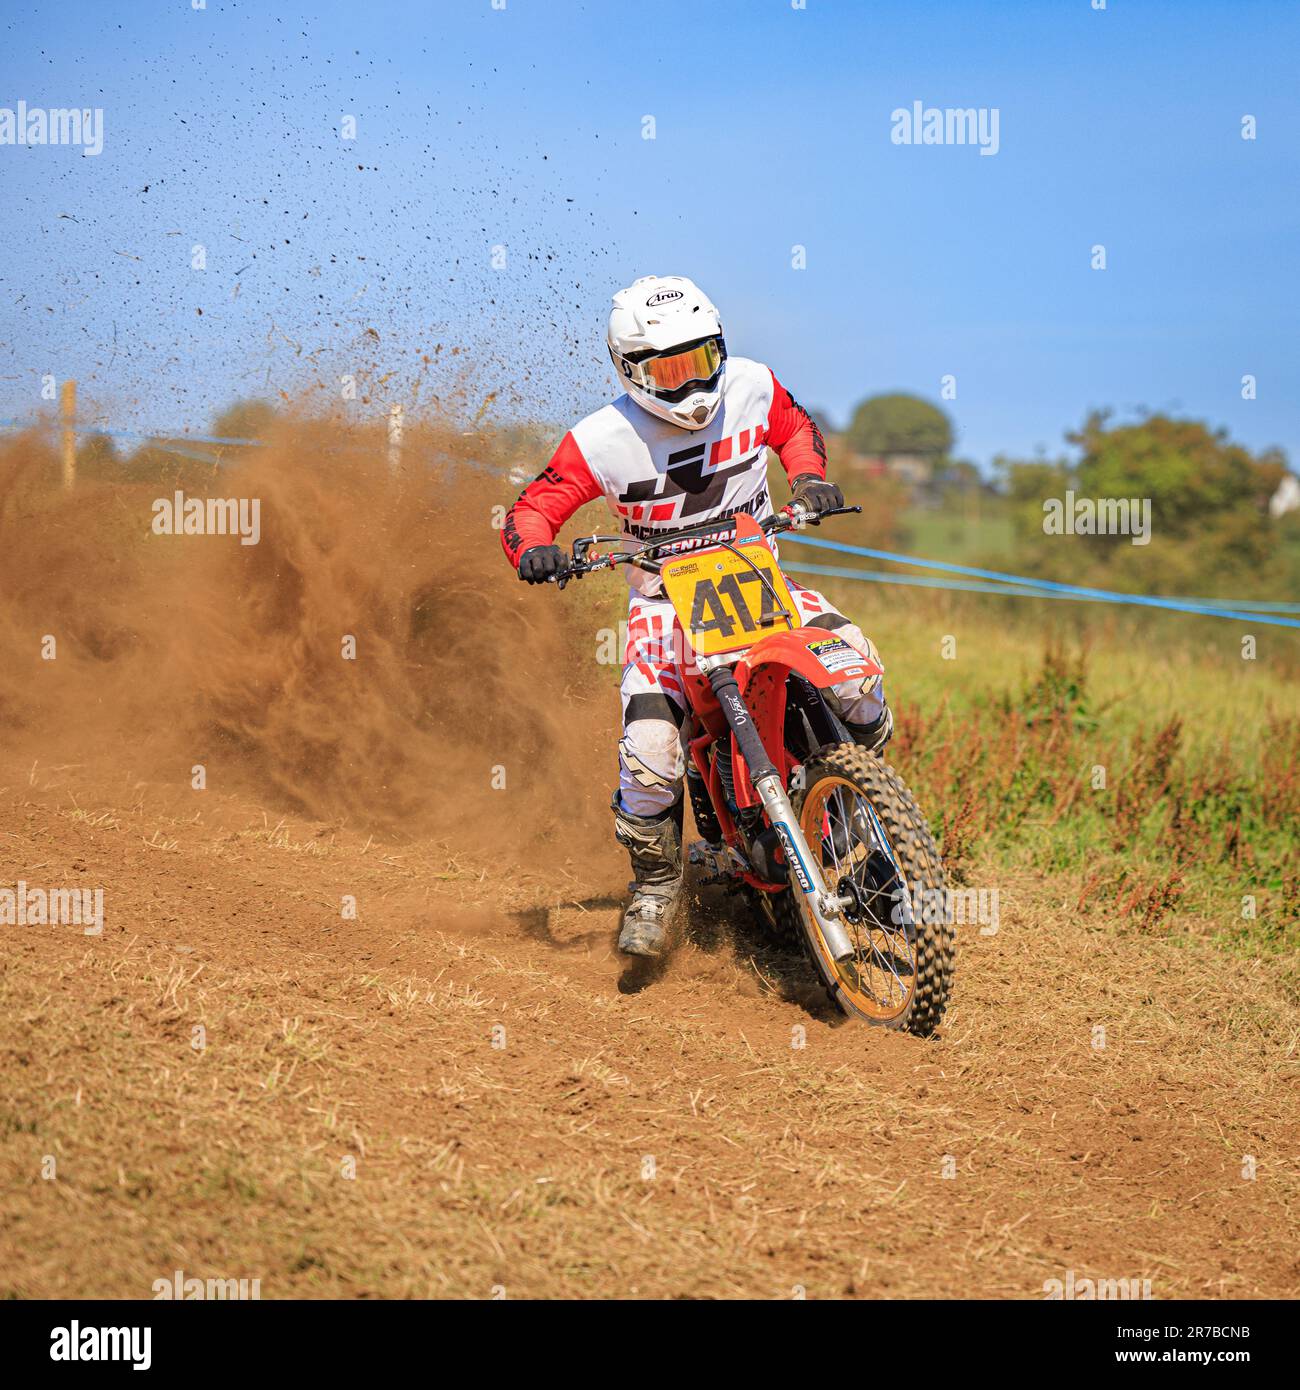 A motocross racer is pictured mid-air, flying sideways while creating a dust wind vortex behind him Stock Photo